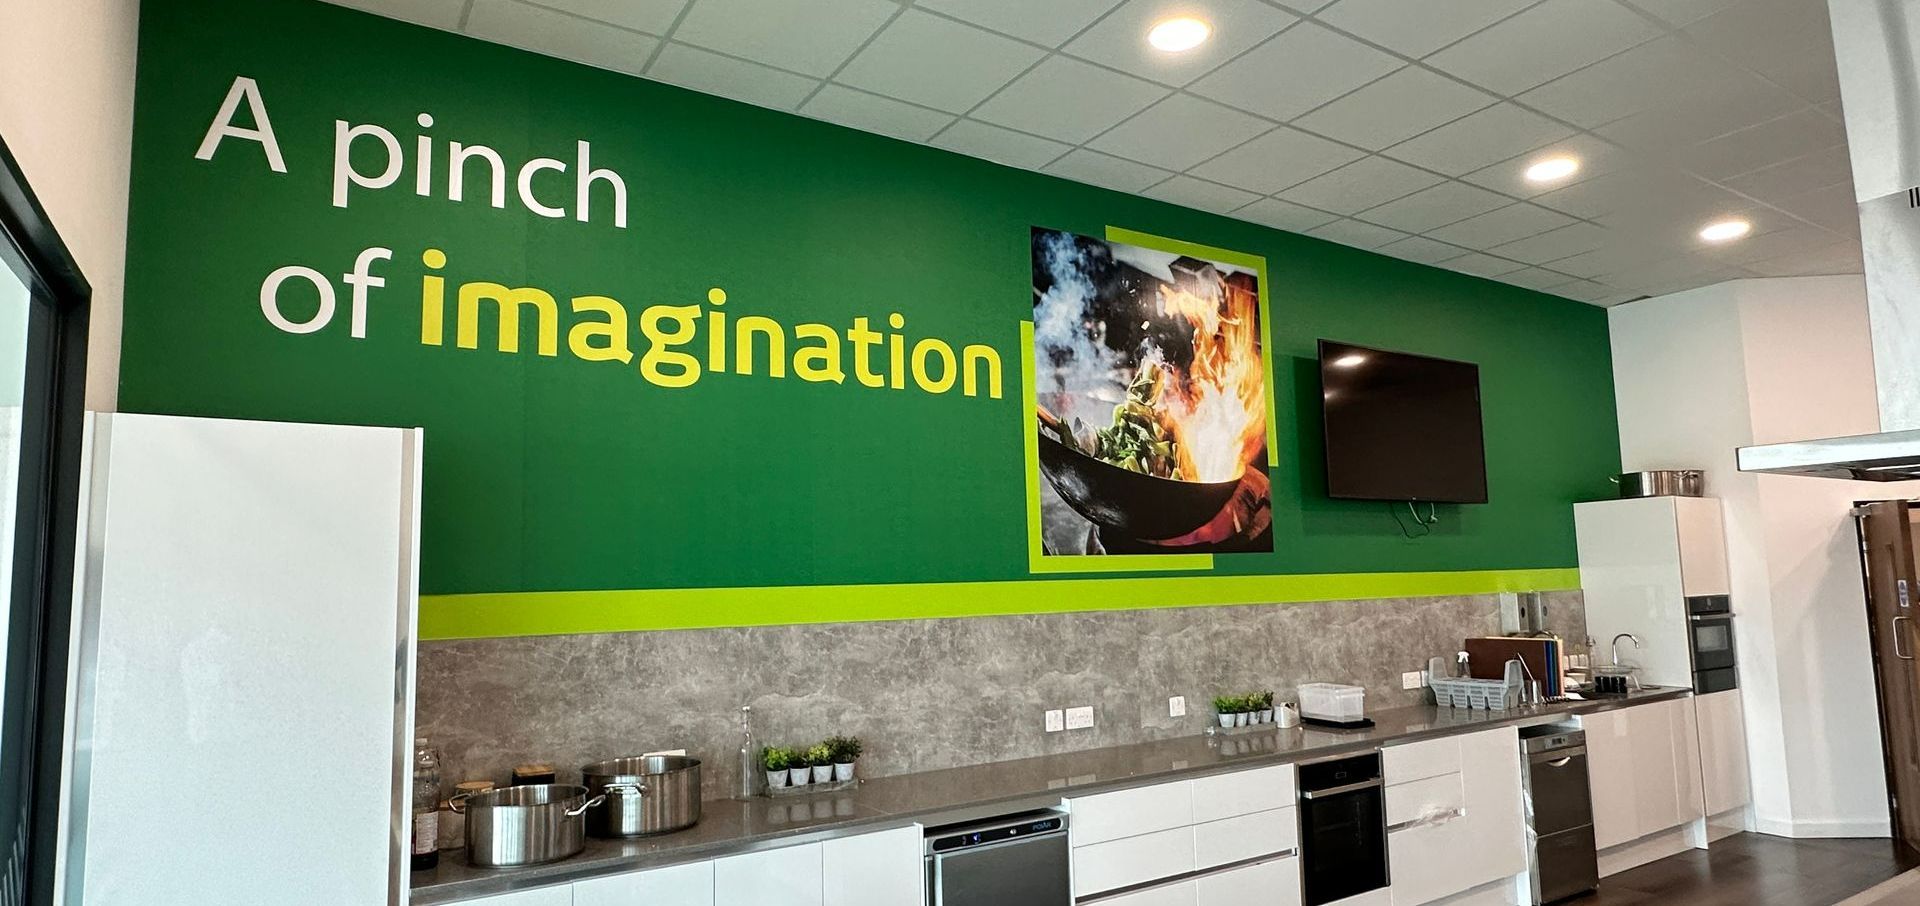 A kitchen with a green wall that says `` a pinch of imagination ''.